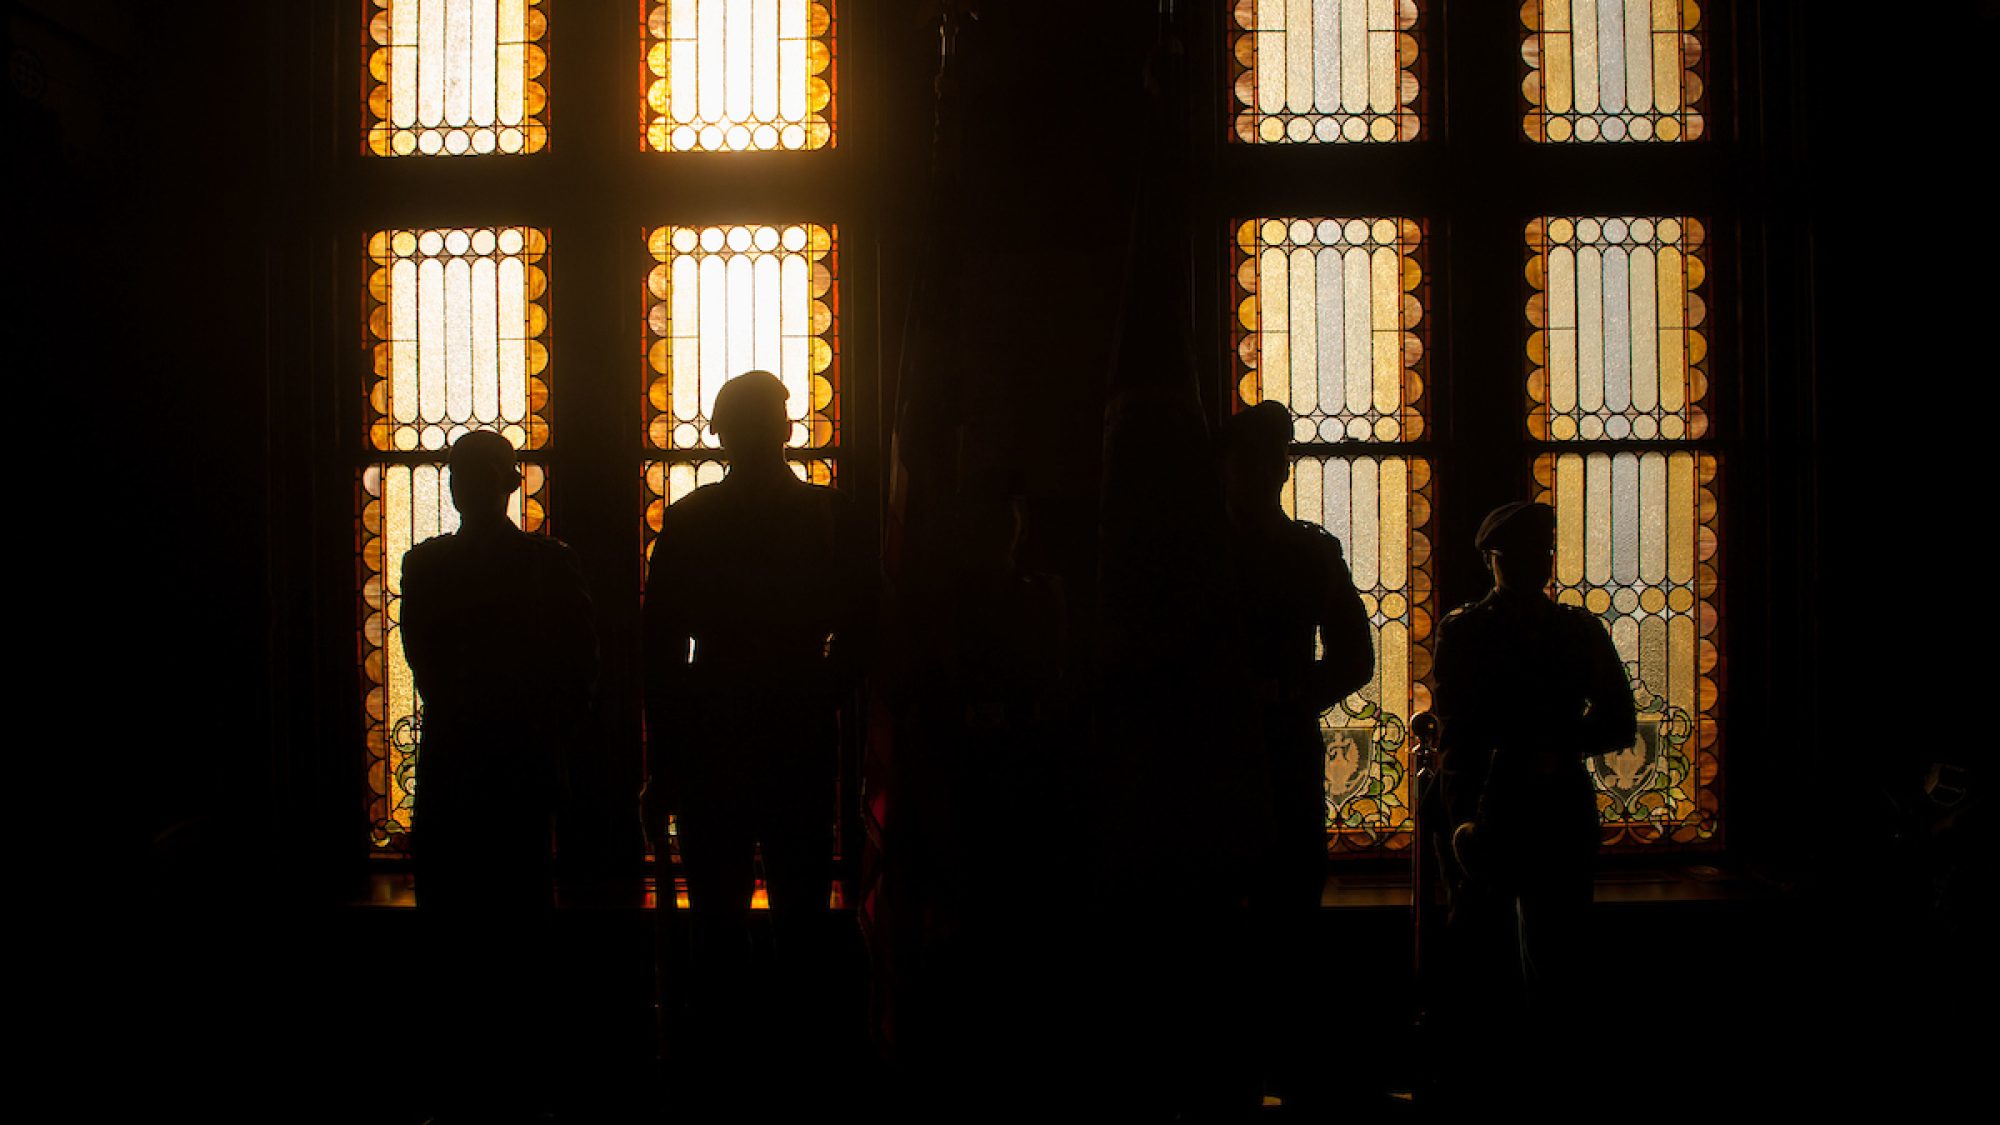 ROTC students in silhouette against light from stain glass windows in Gaston Hall